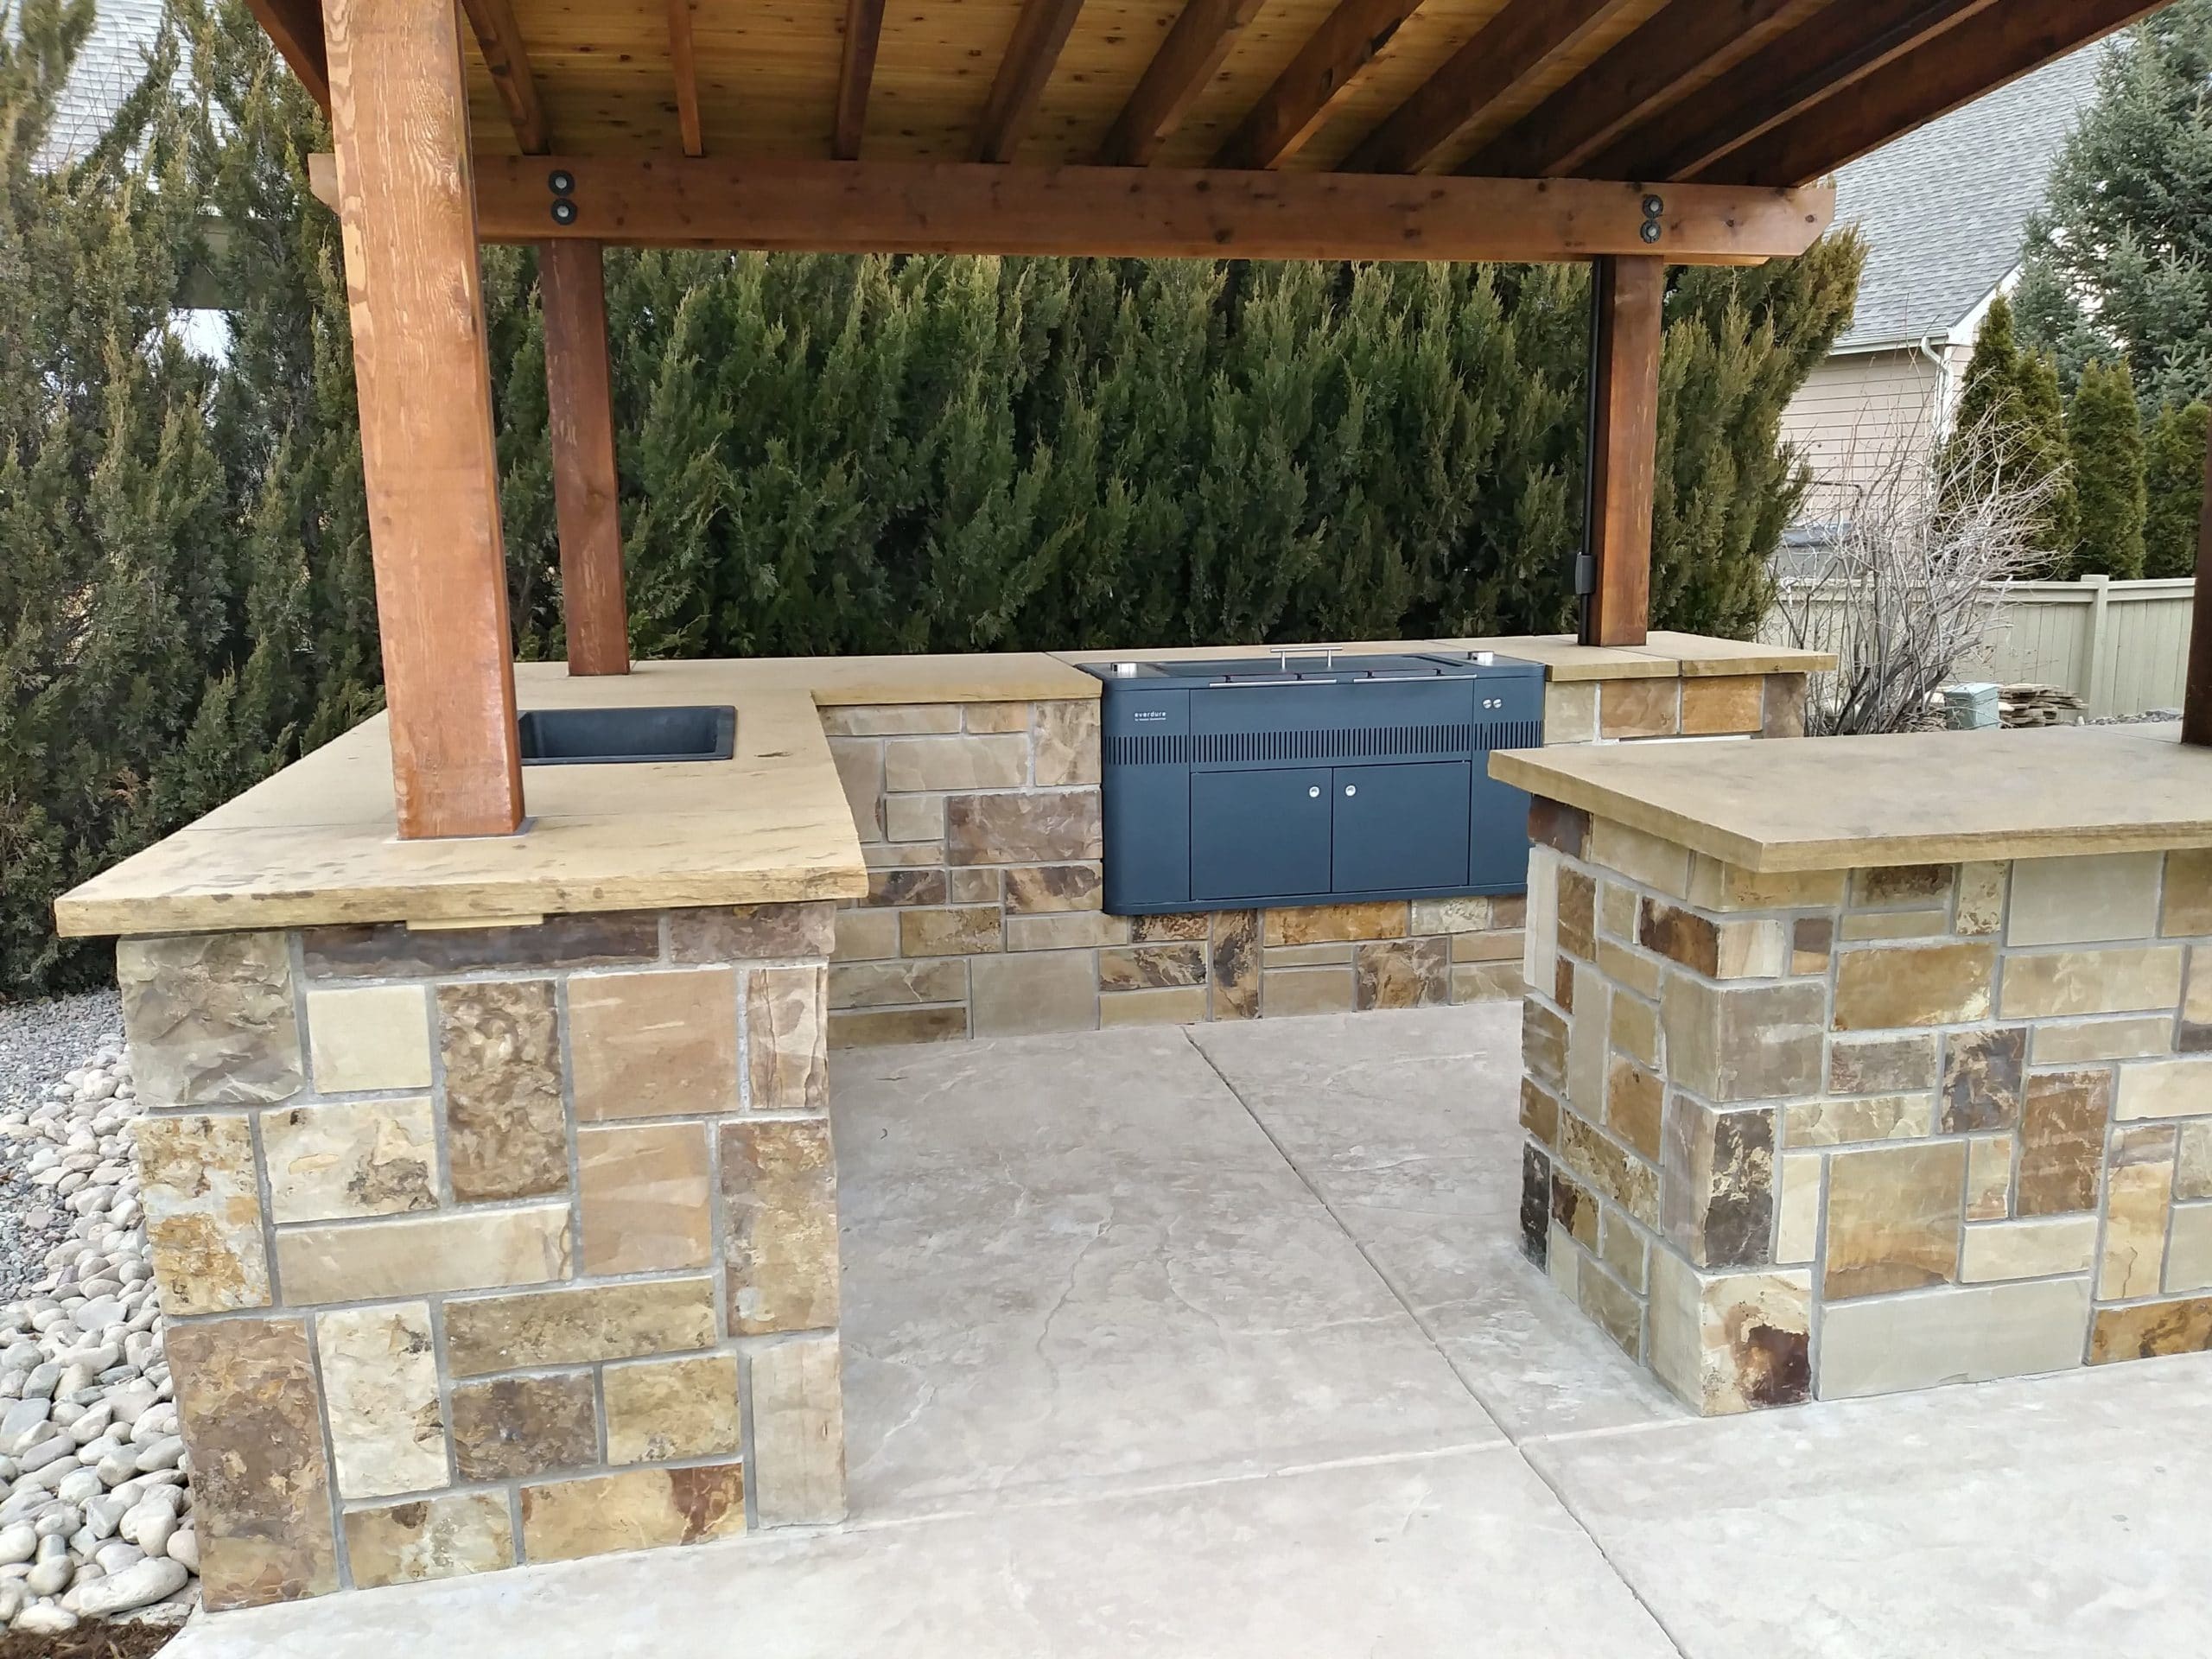 Outdoor Kitchen with patio and outdoor seating and eating area.